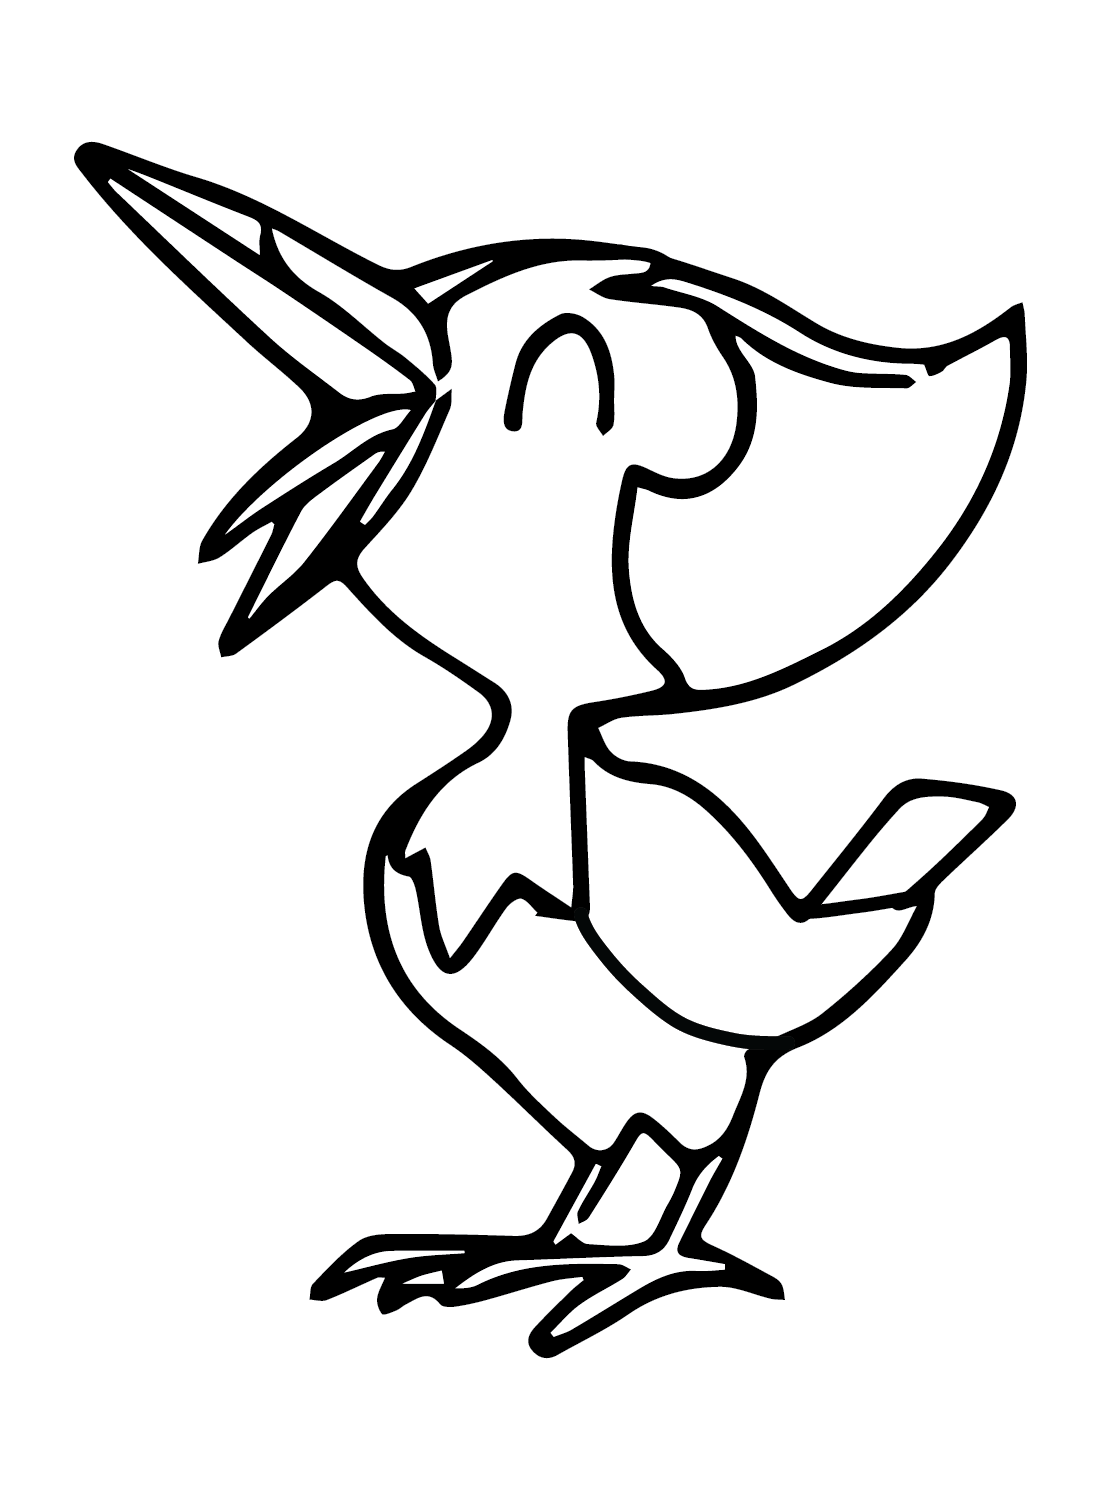 Pikipek Cute Coloring Page - Free Printable Coloring Pages